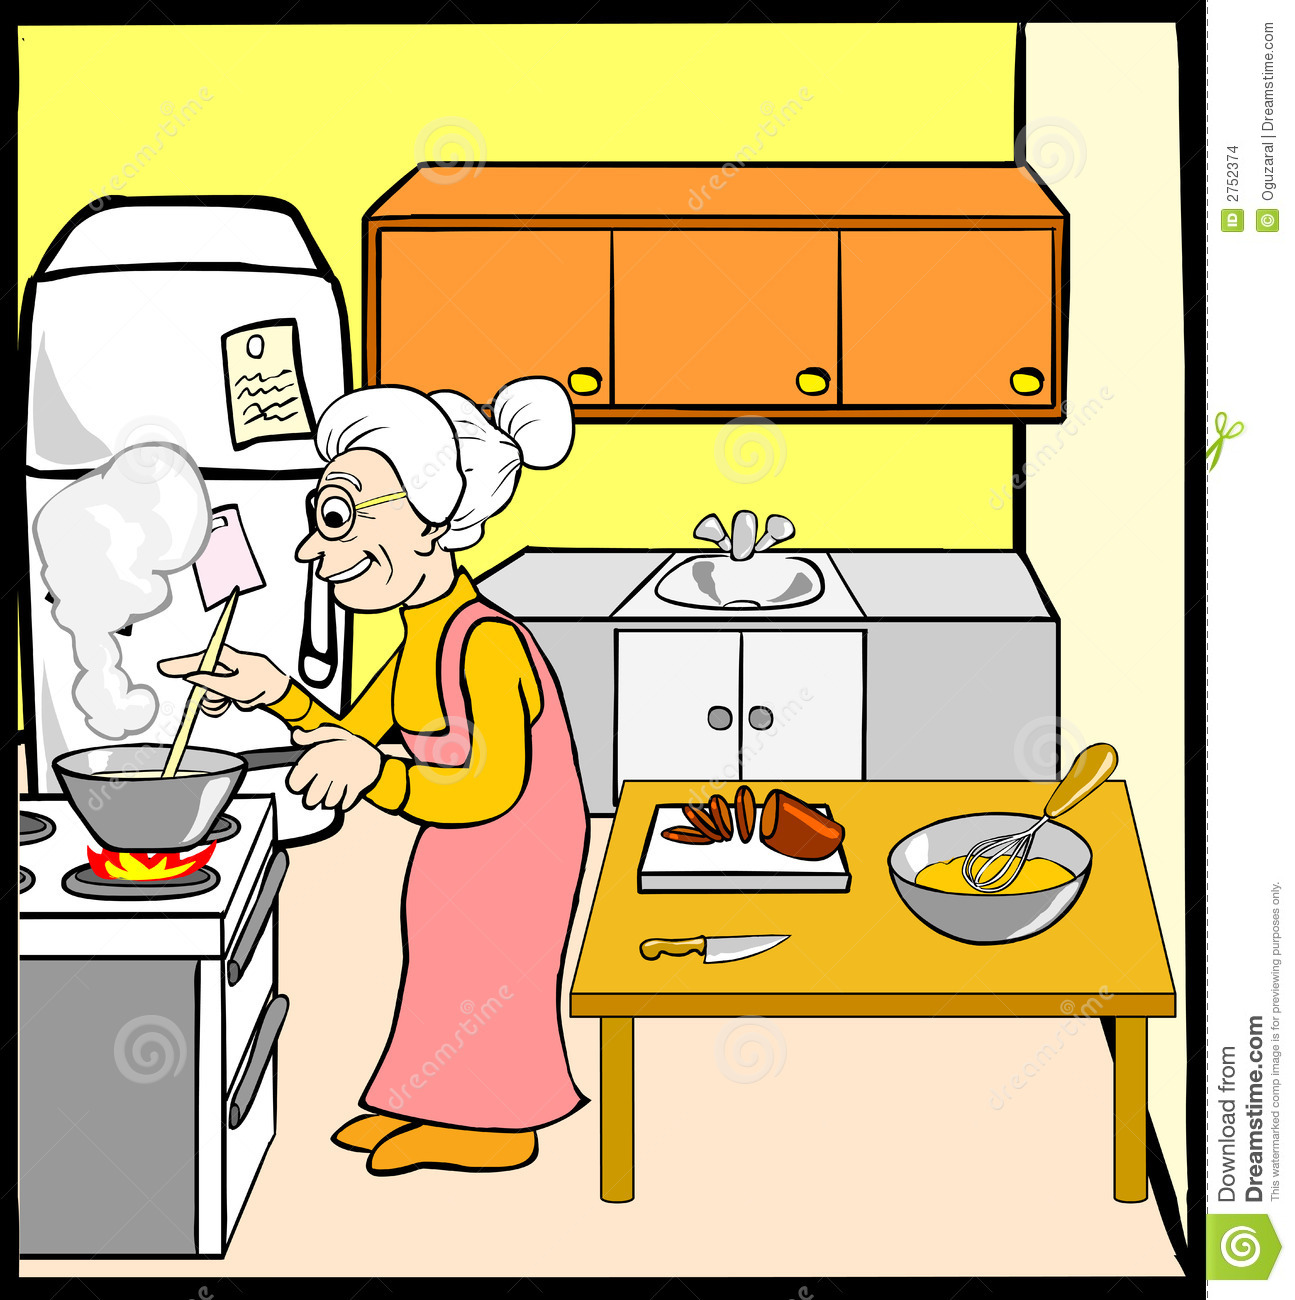 More Similar Stock Images Of Grandmother In Kitchen